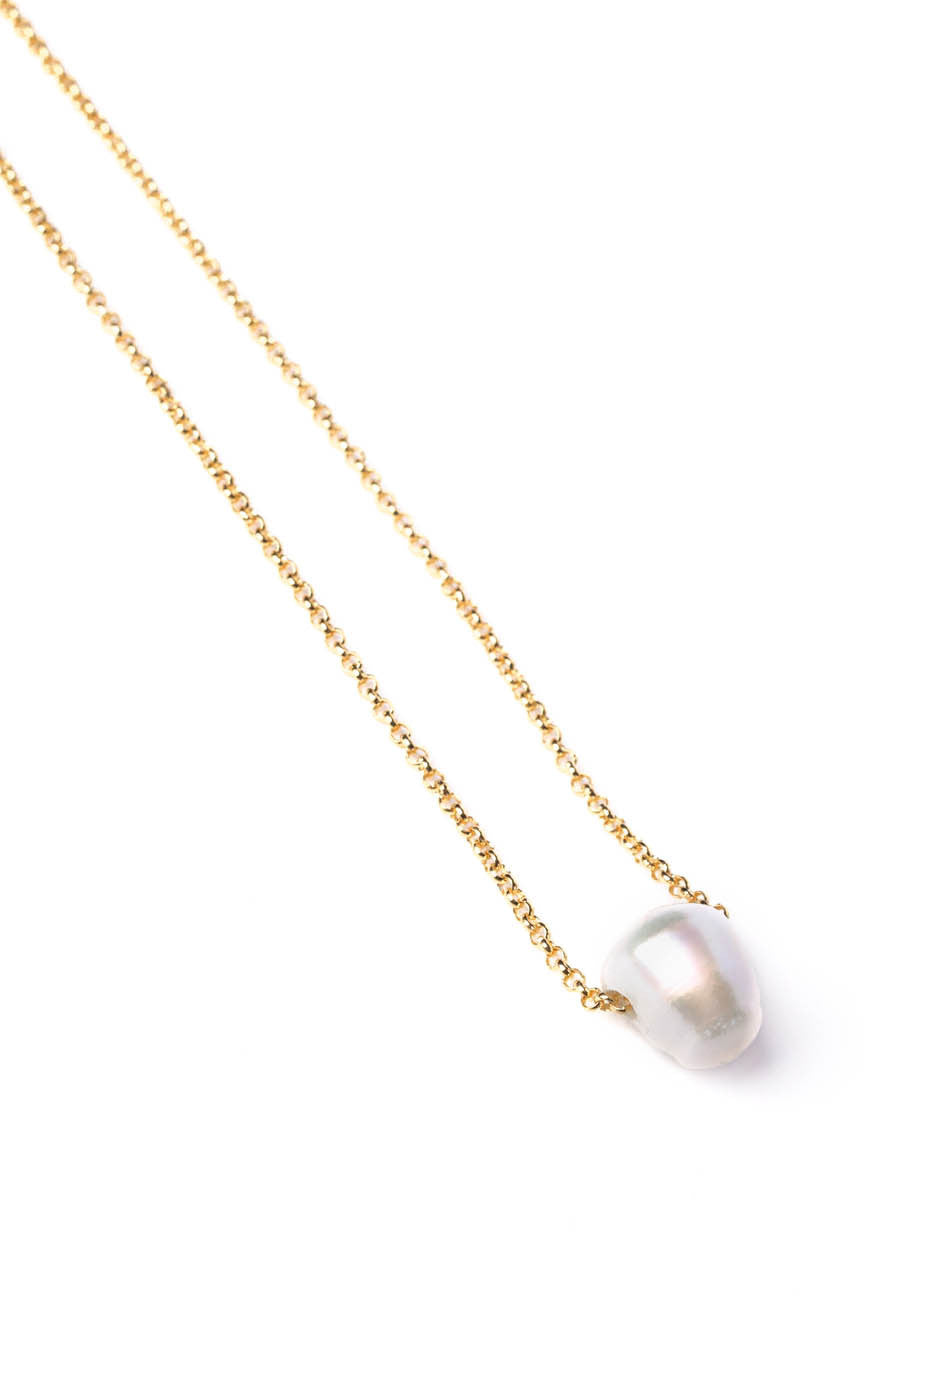 Freshwater Pearl Necklace on Gold Chain